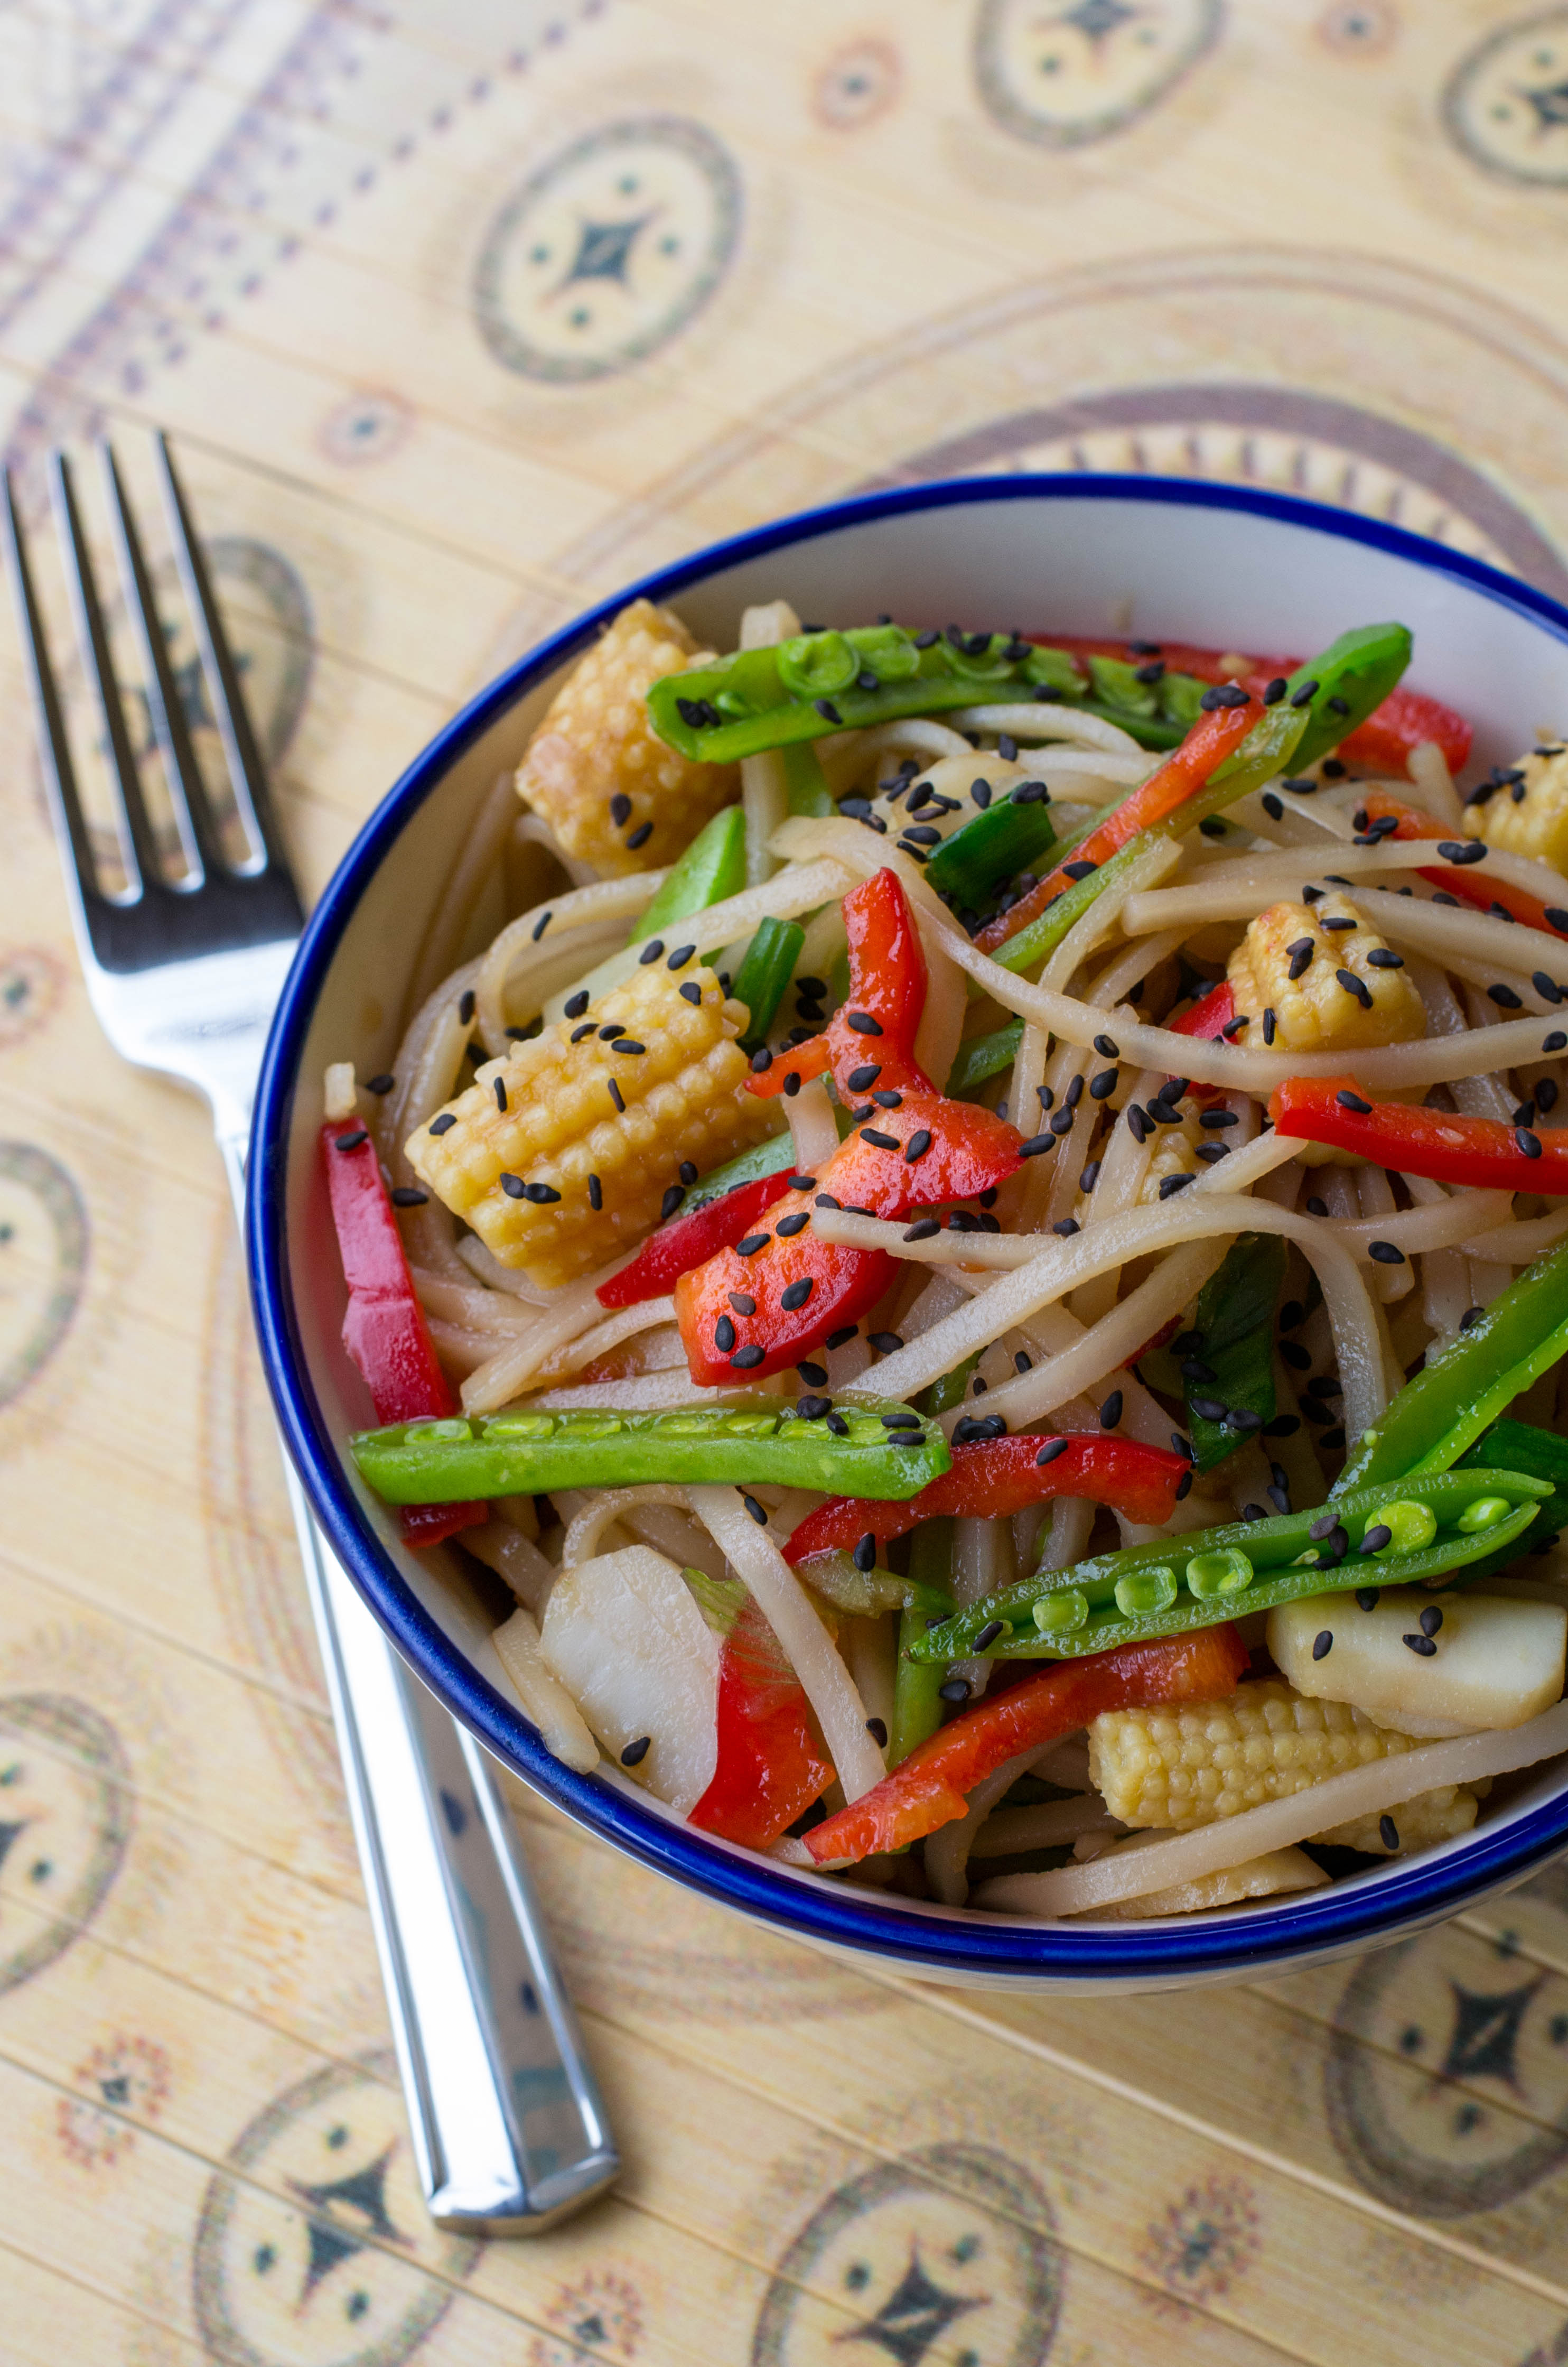 Asian Veggie Noodle Bowl - What the Forks for Dinner?